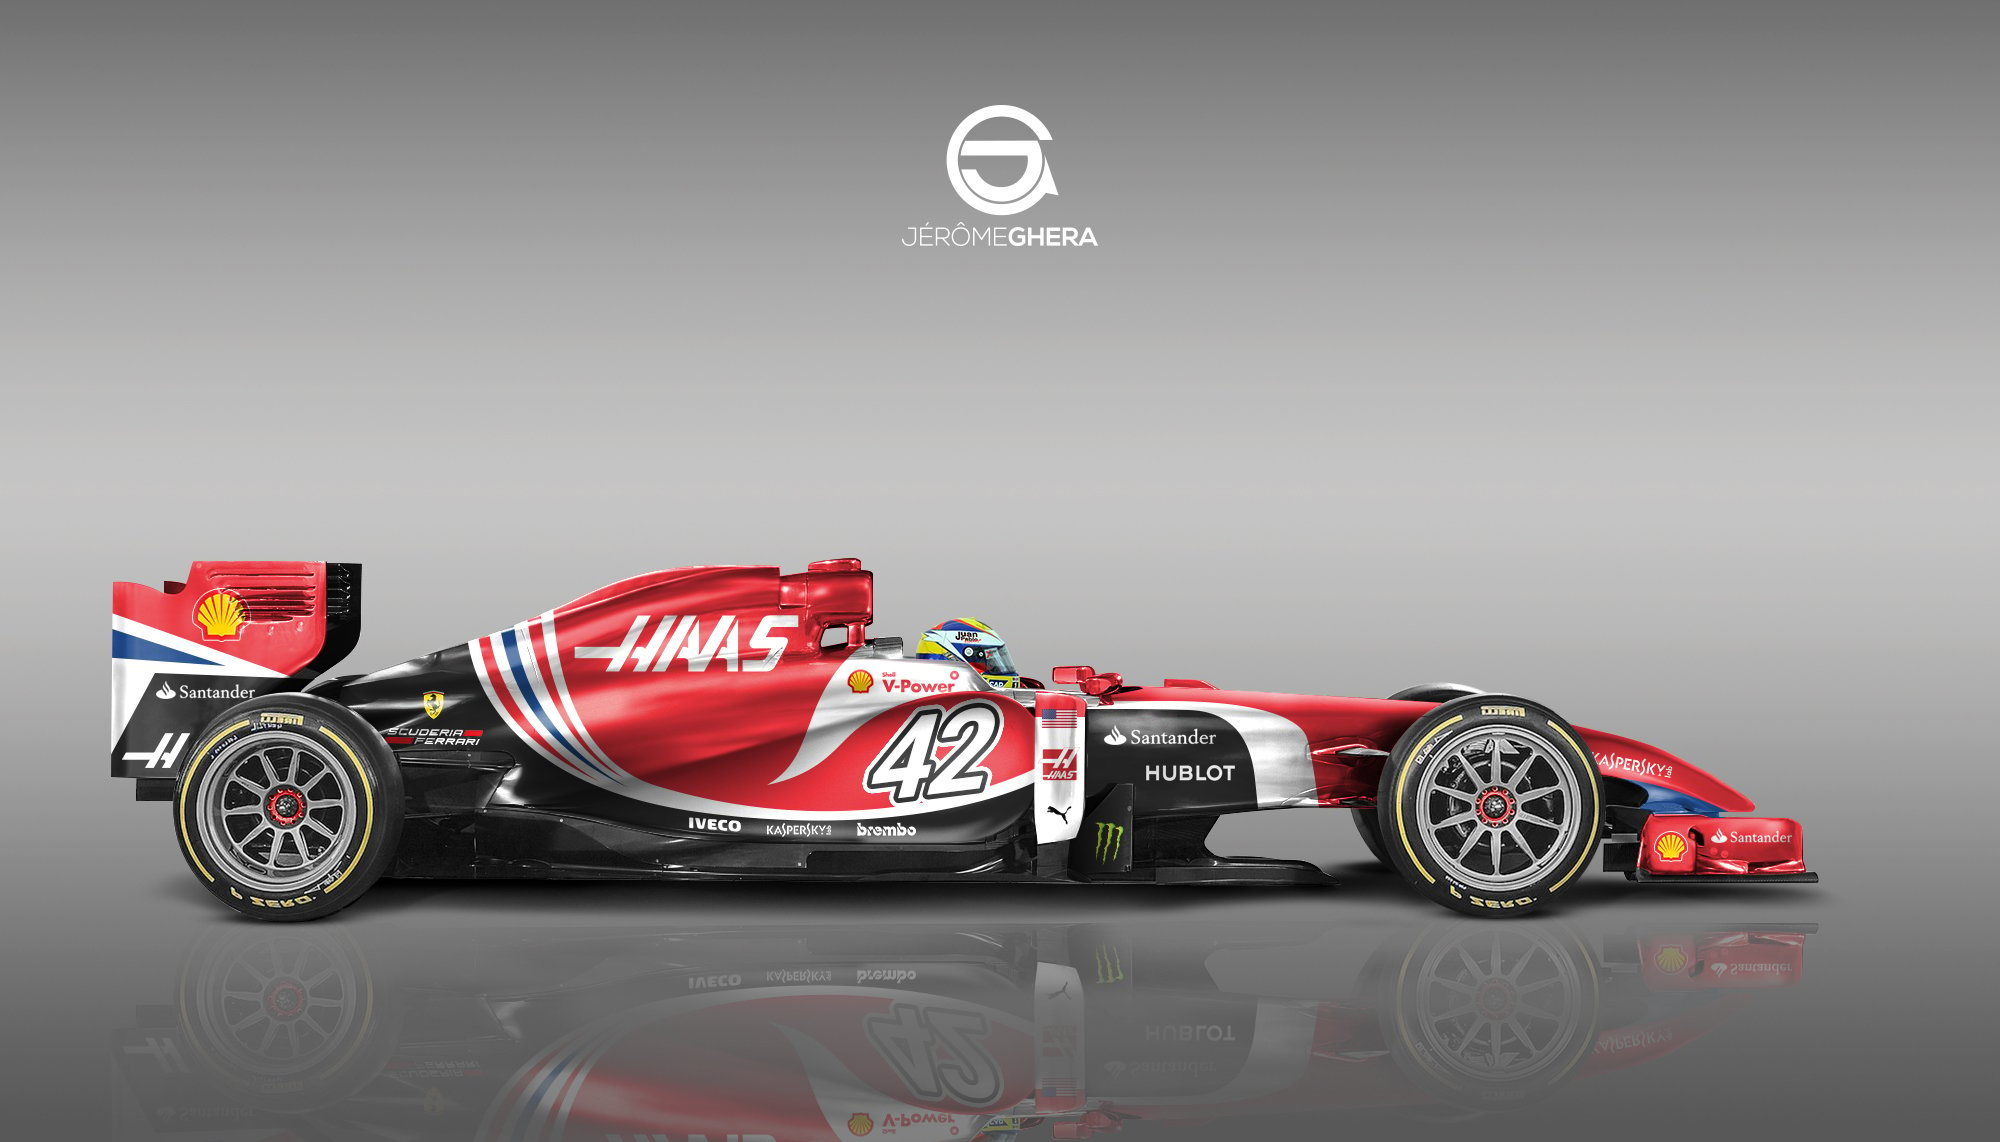 Free download Haas F1 2016 Concept Livery Formula1 [2000x1142] for your Desktop, Mobile & Tablet. Explore Haas Formula 1 Wallpaper. Haas F1 Wallpaper, F1 Wallpaper Formula 1 Wallpaper 2015